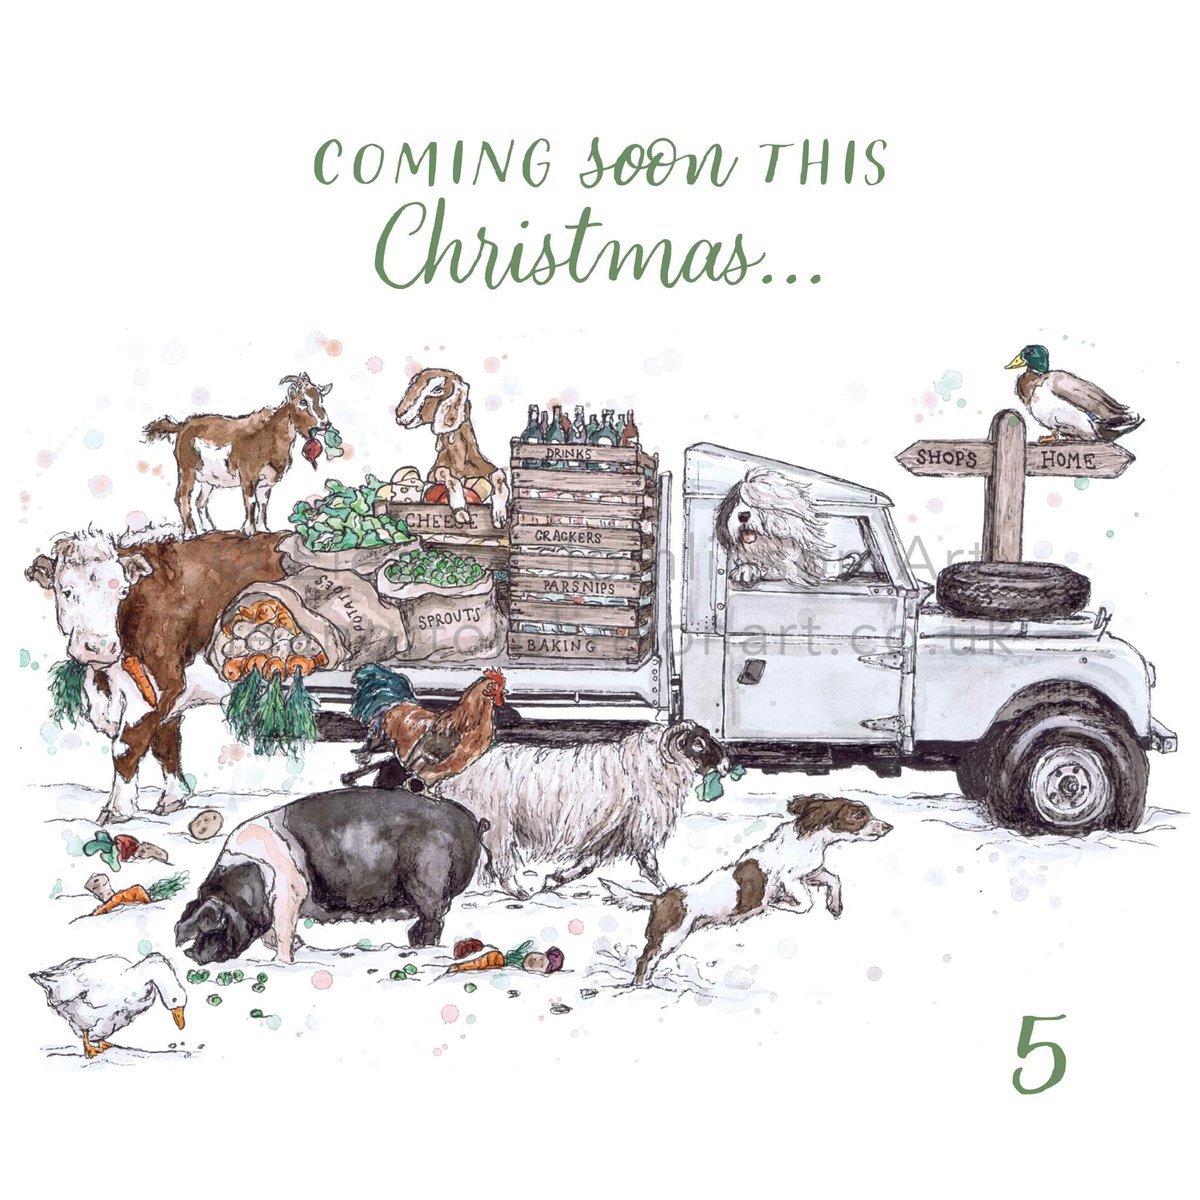 Let’s start the countdown… ⭐️ So much festive newness coming to the website from this Sunday!! Starting with one of the new pieces from the collection this year ‘The BIG Christmas Shop’…. #christmasiscoming #landrover #shopping #foodshopping